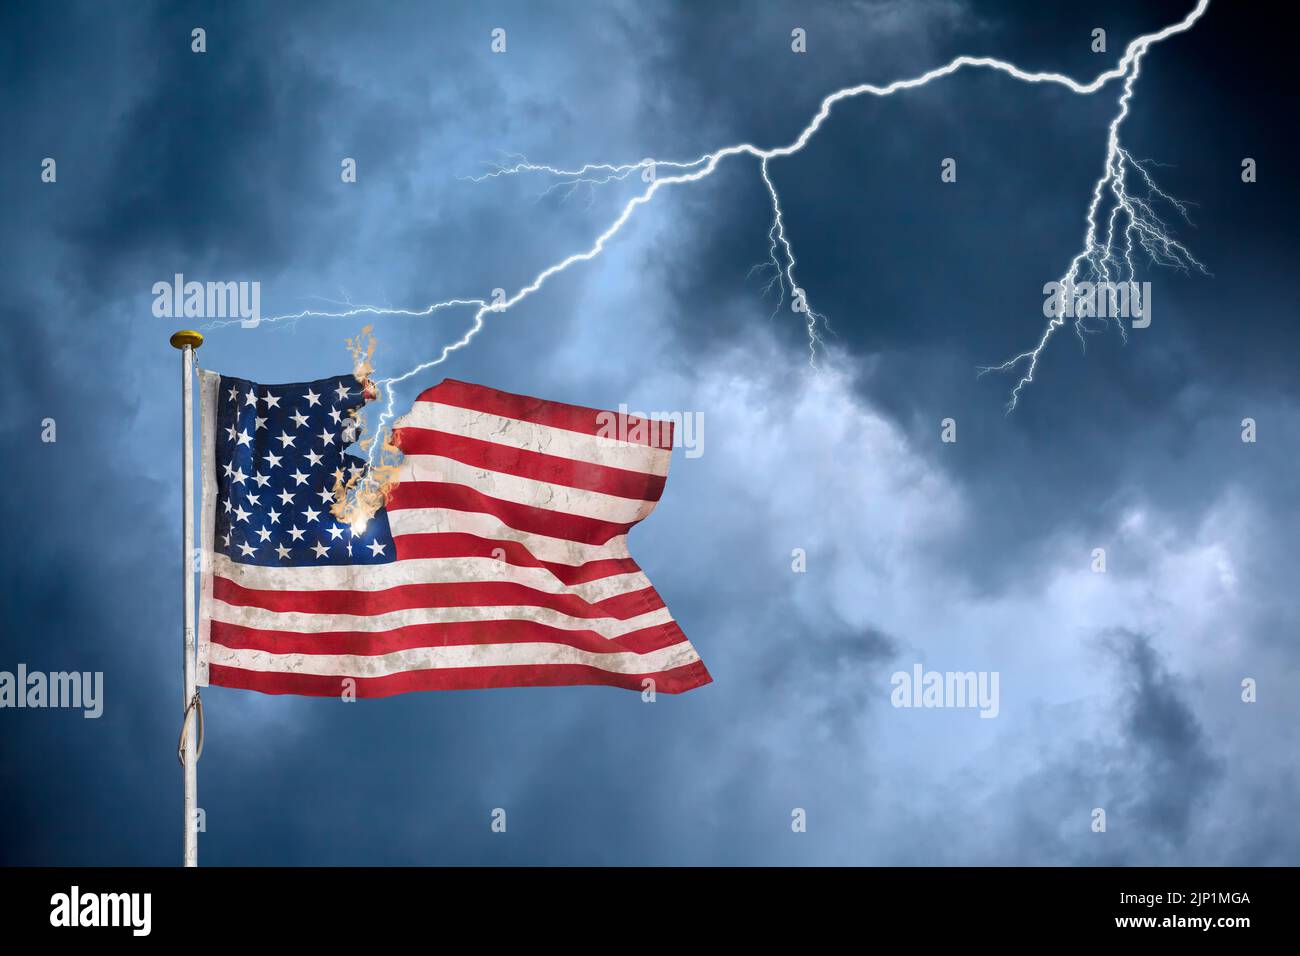 Concept of the economic crisis with the American flag struck by lightning Stock Photo